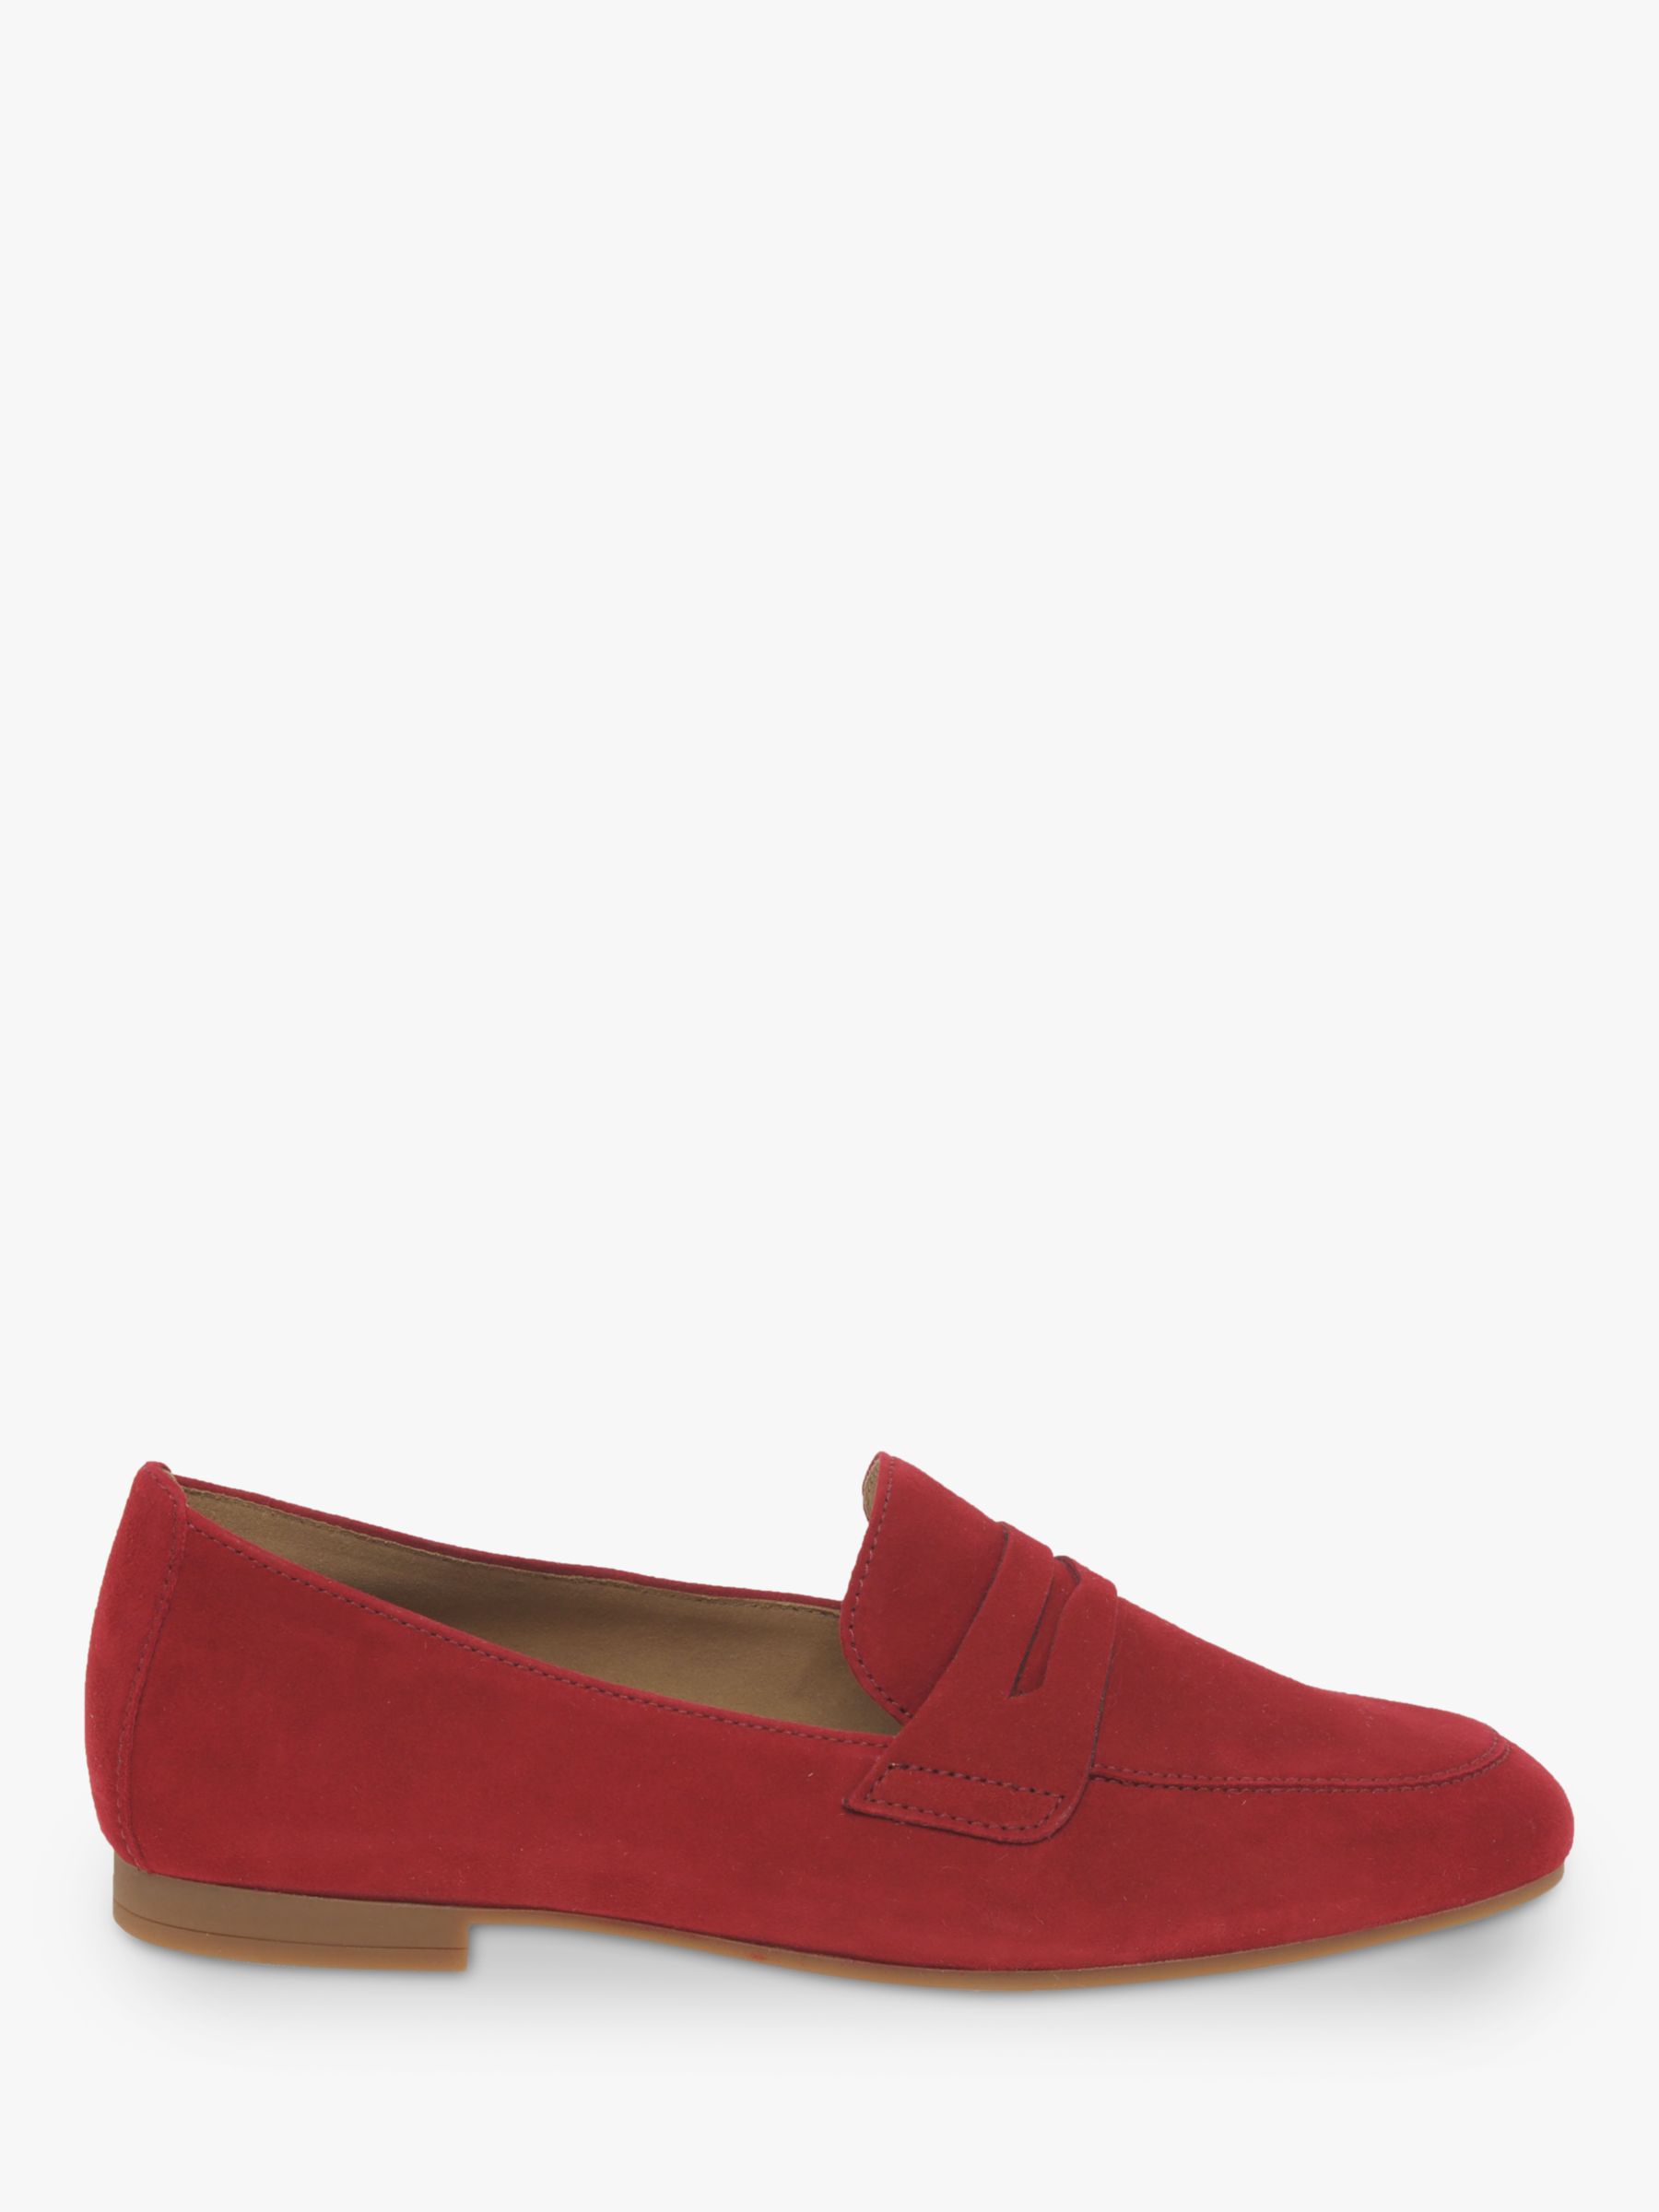 Gabor Viva Suede Loafers